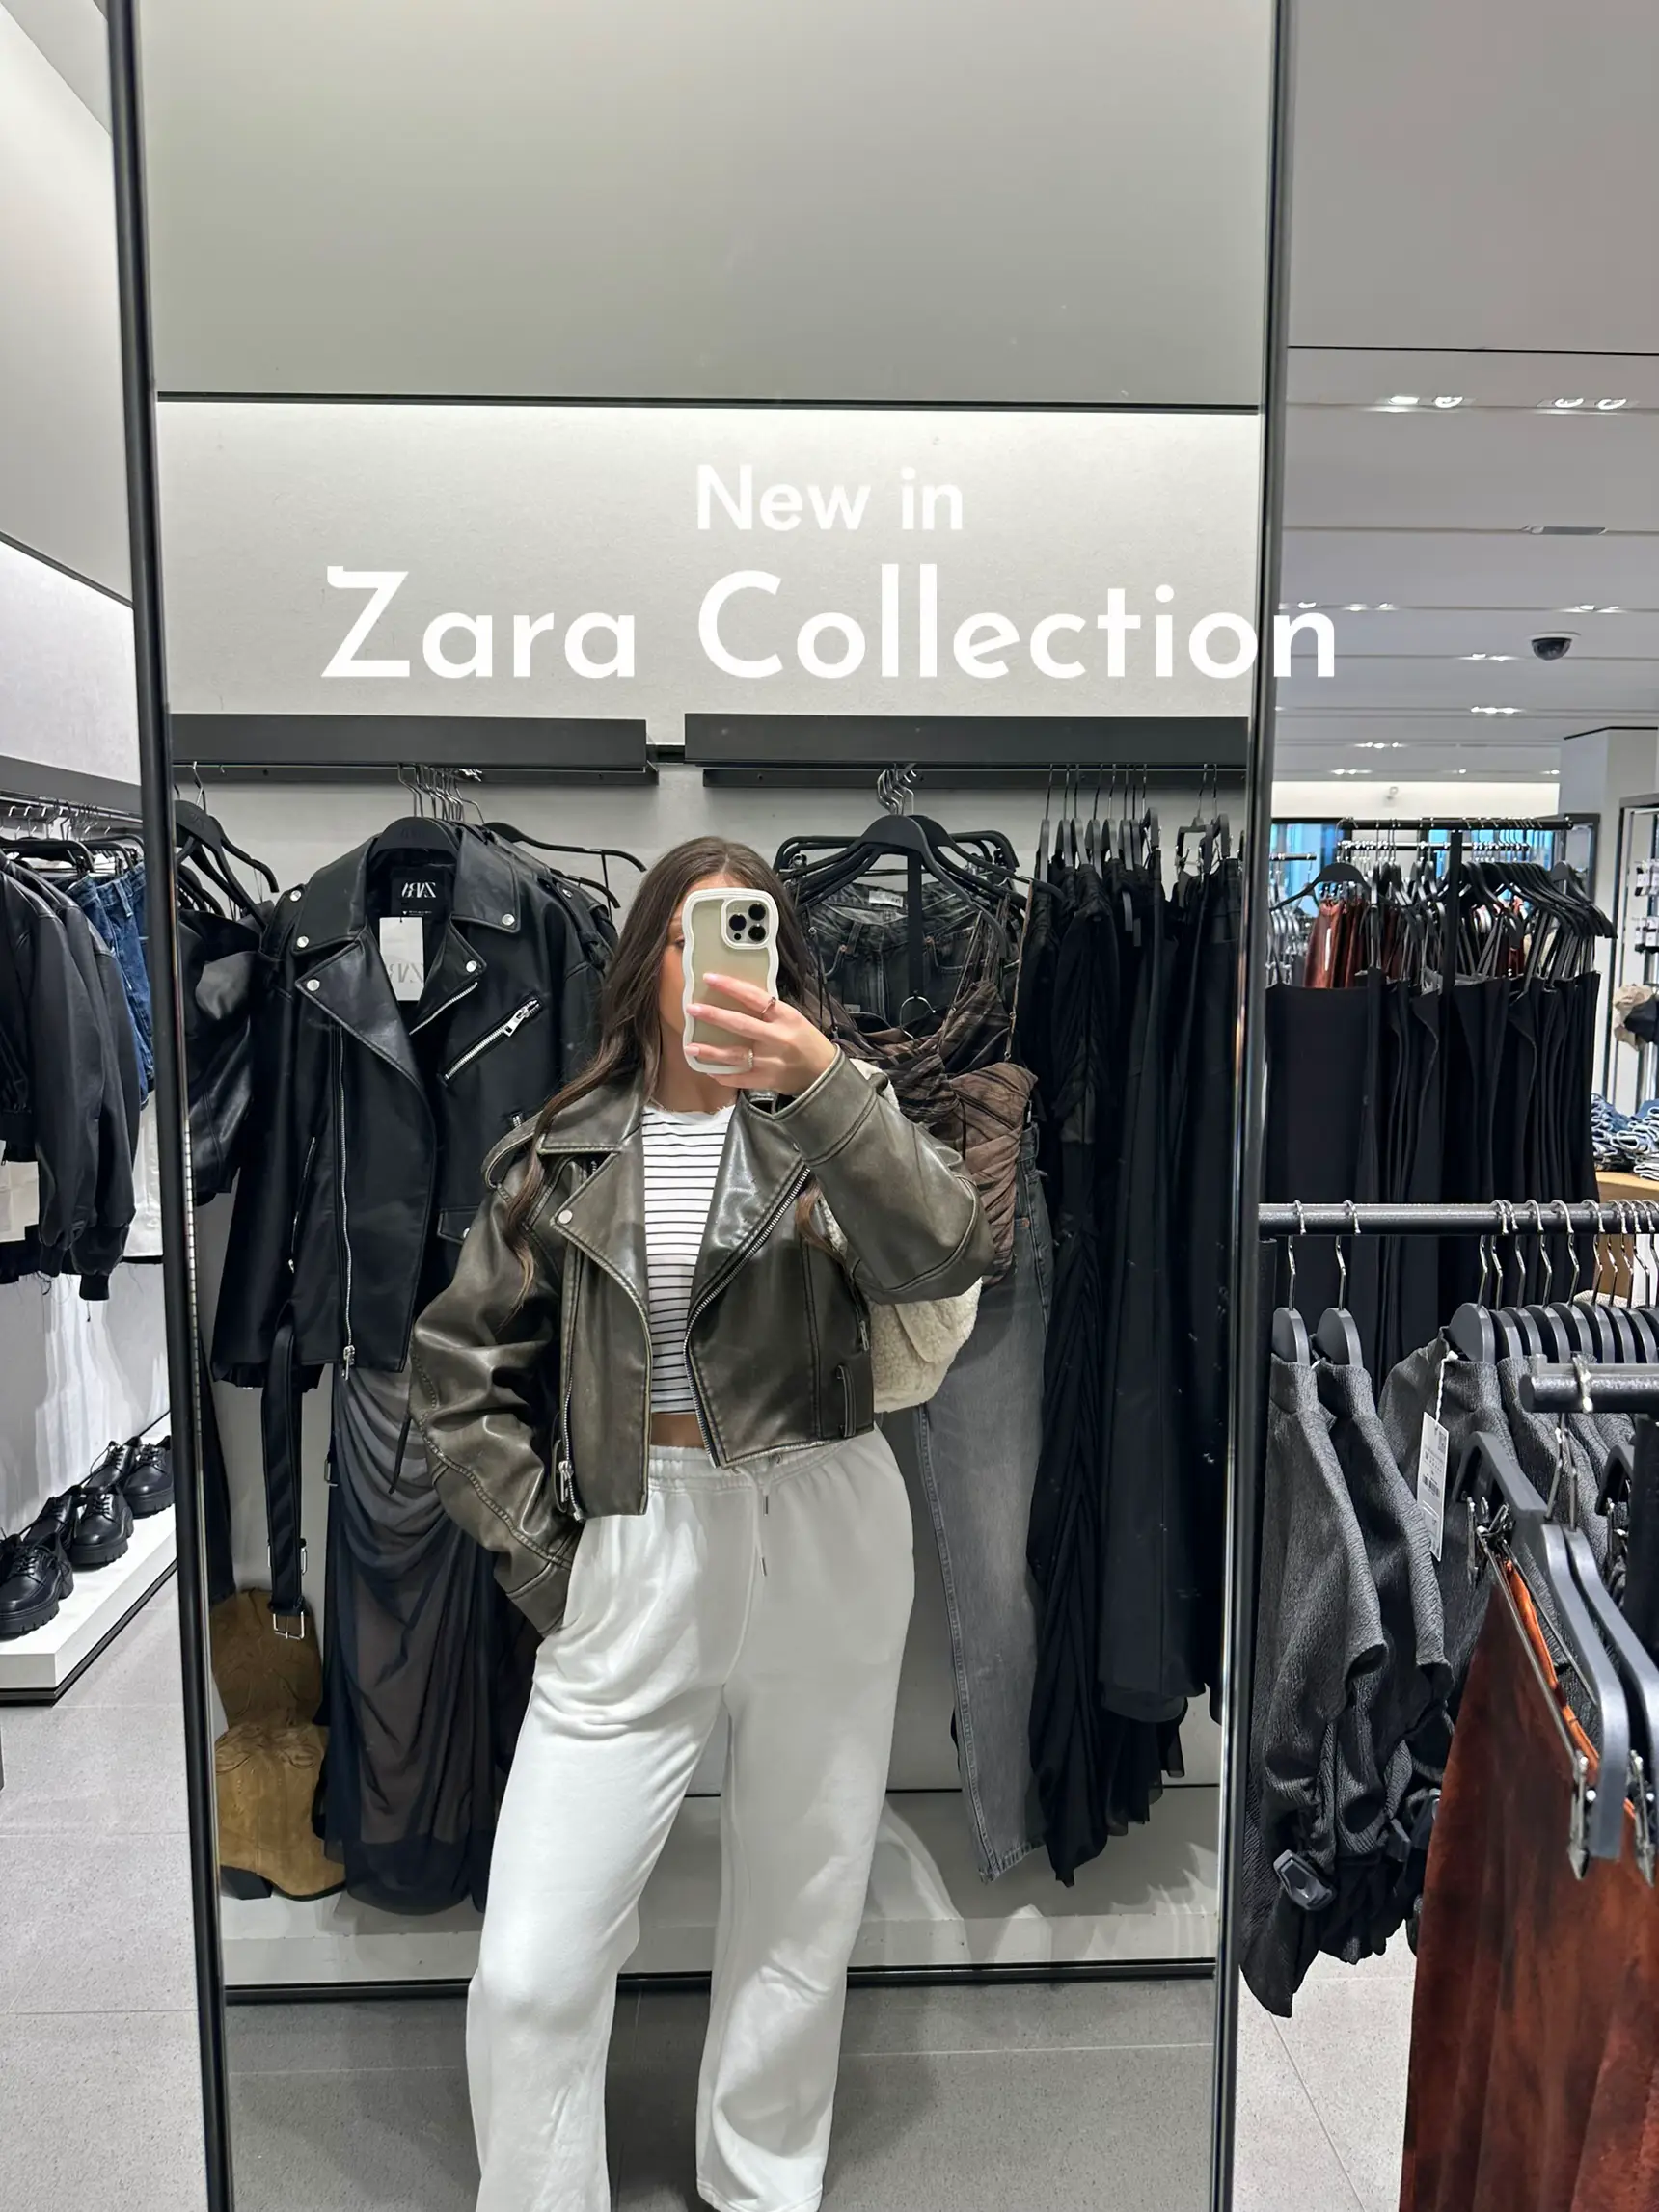 Zara Collection New In, Gallery posted by Jodie May